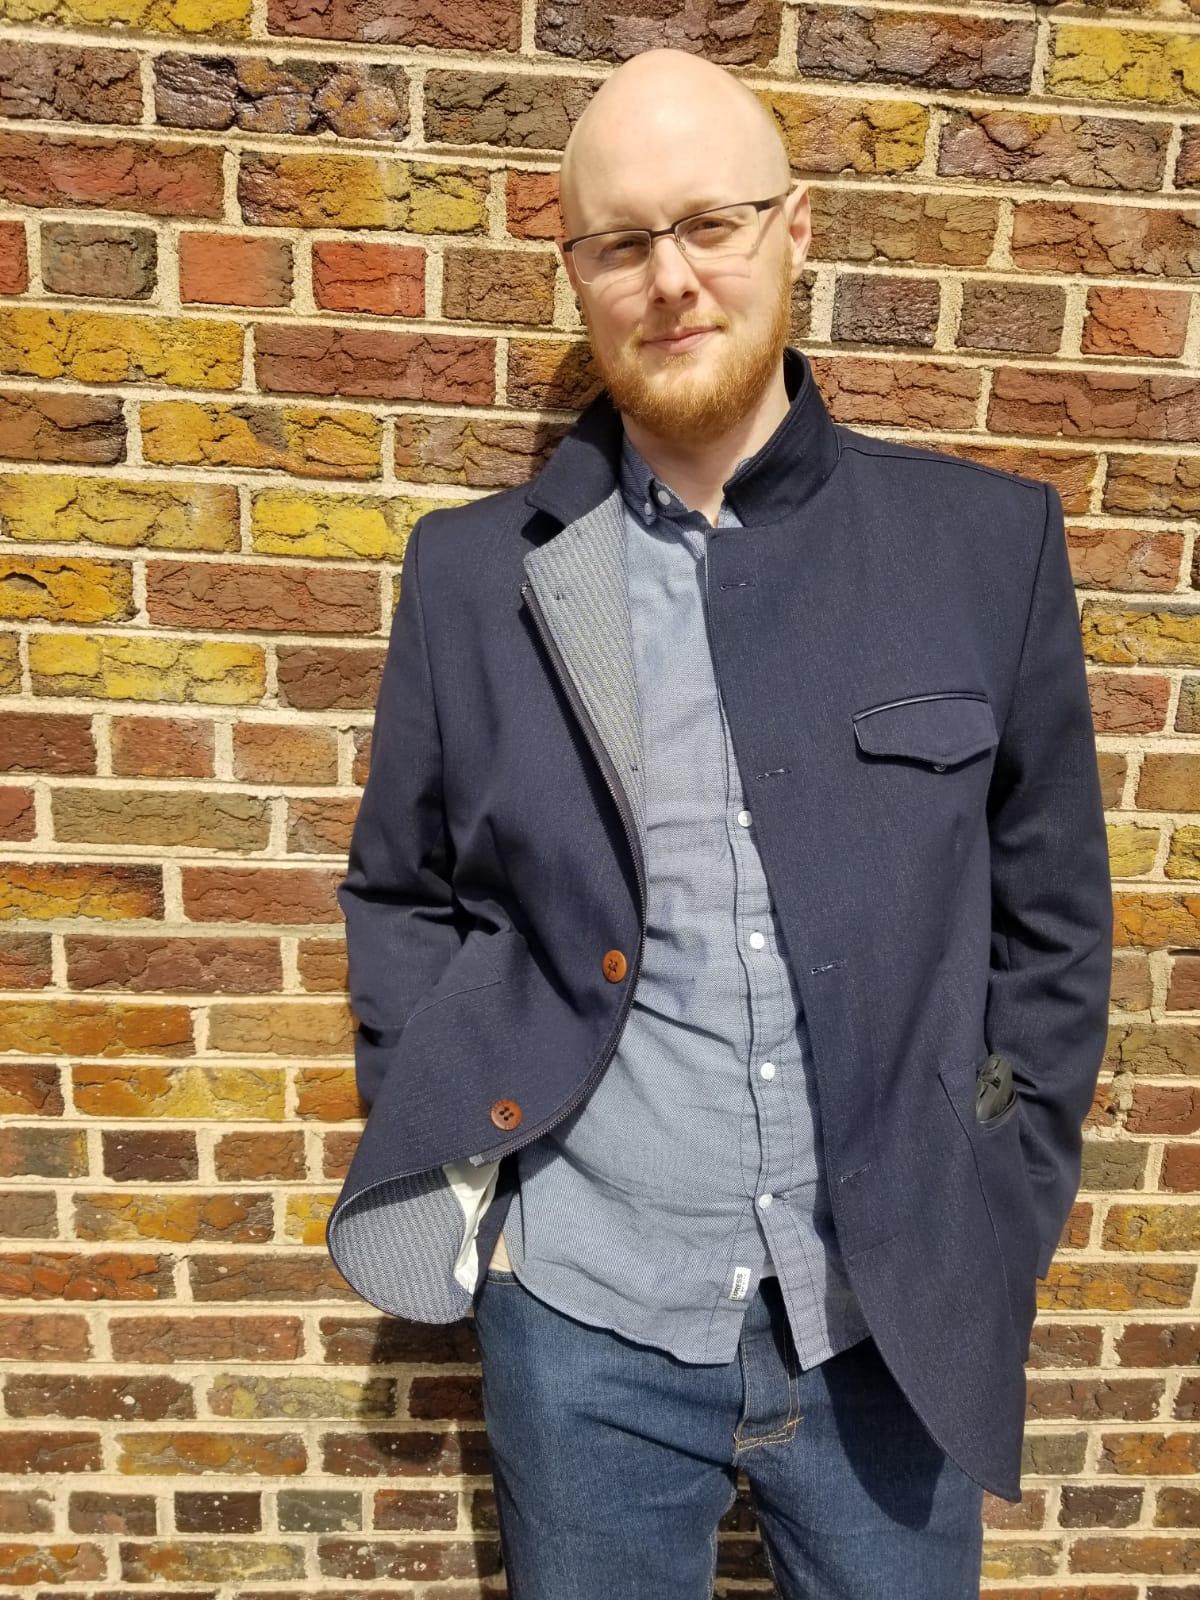 Rex Barkdoll in a dark blue jacket, grey button down shirt and jeans against a brick wall